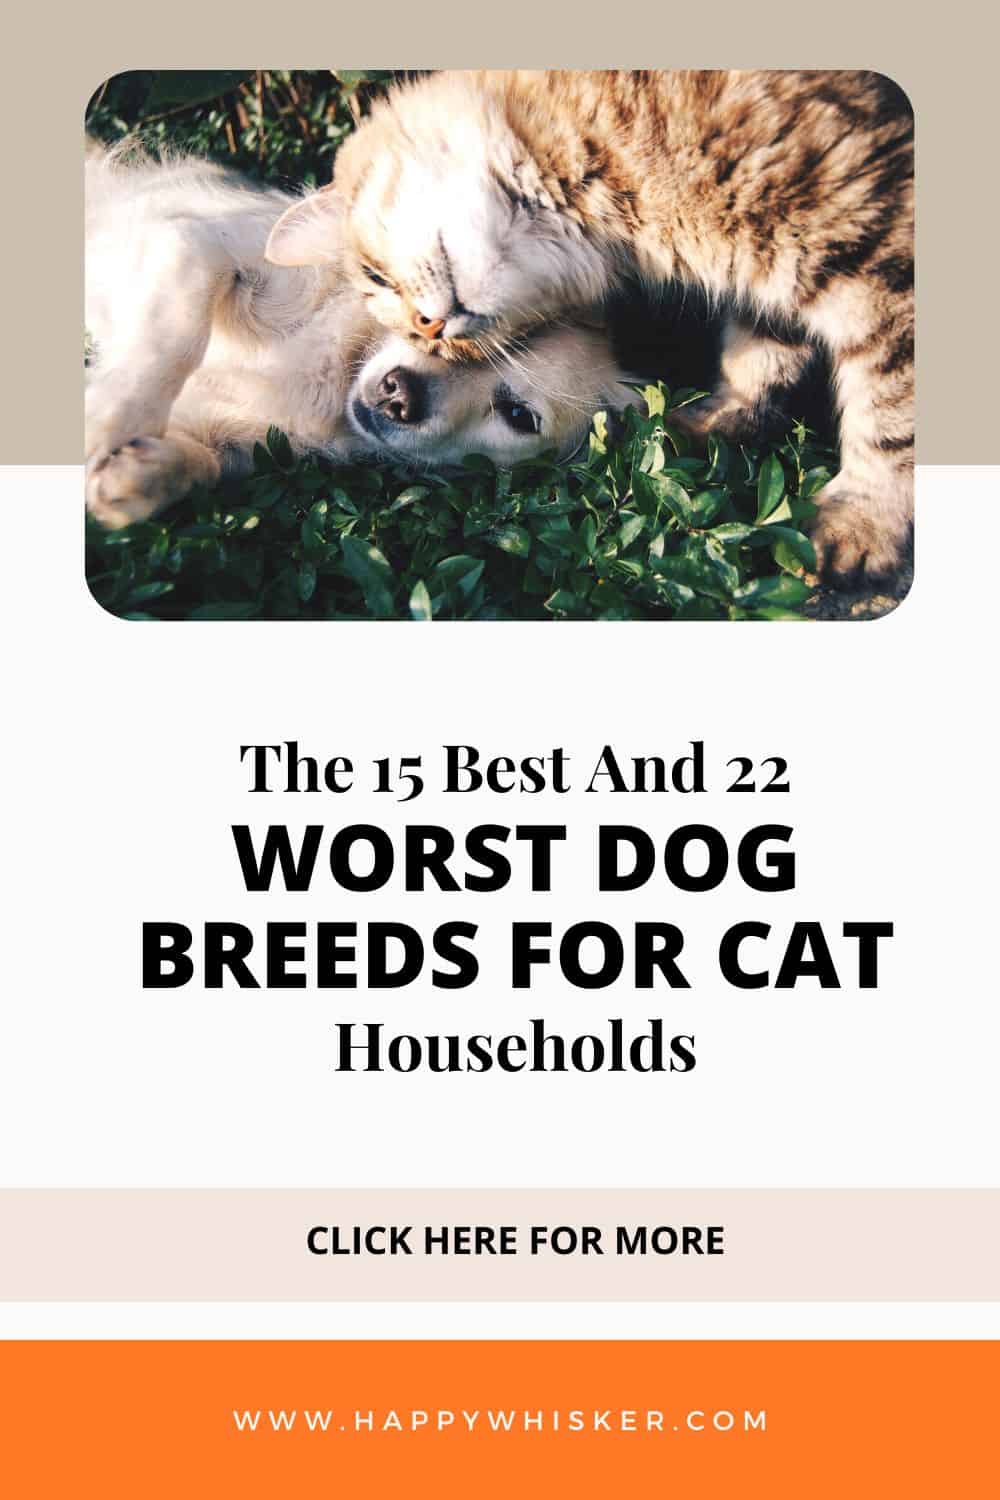 The 15 Best And 22 Worst Dog Breeds For Cat Households Pinterest